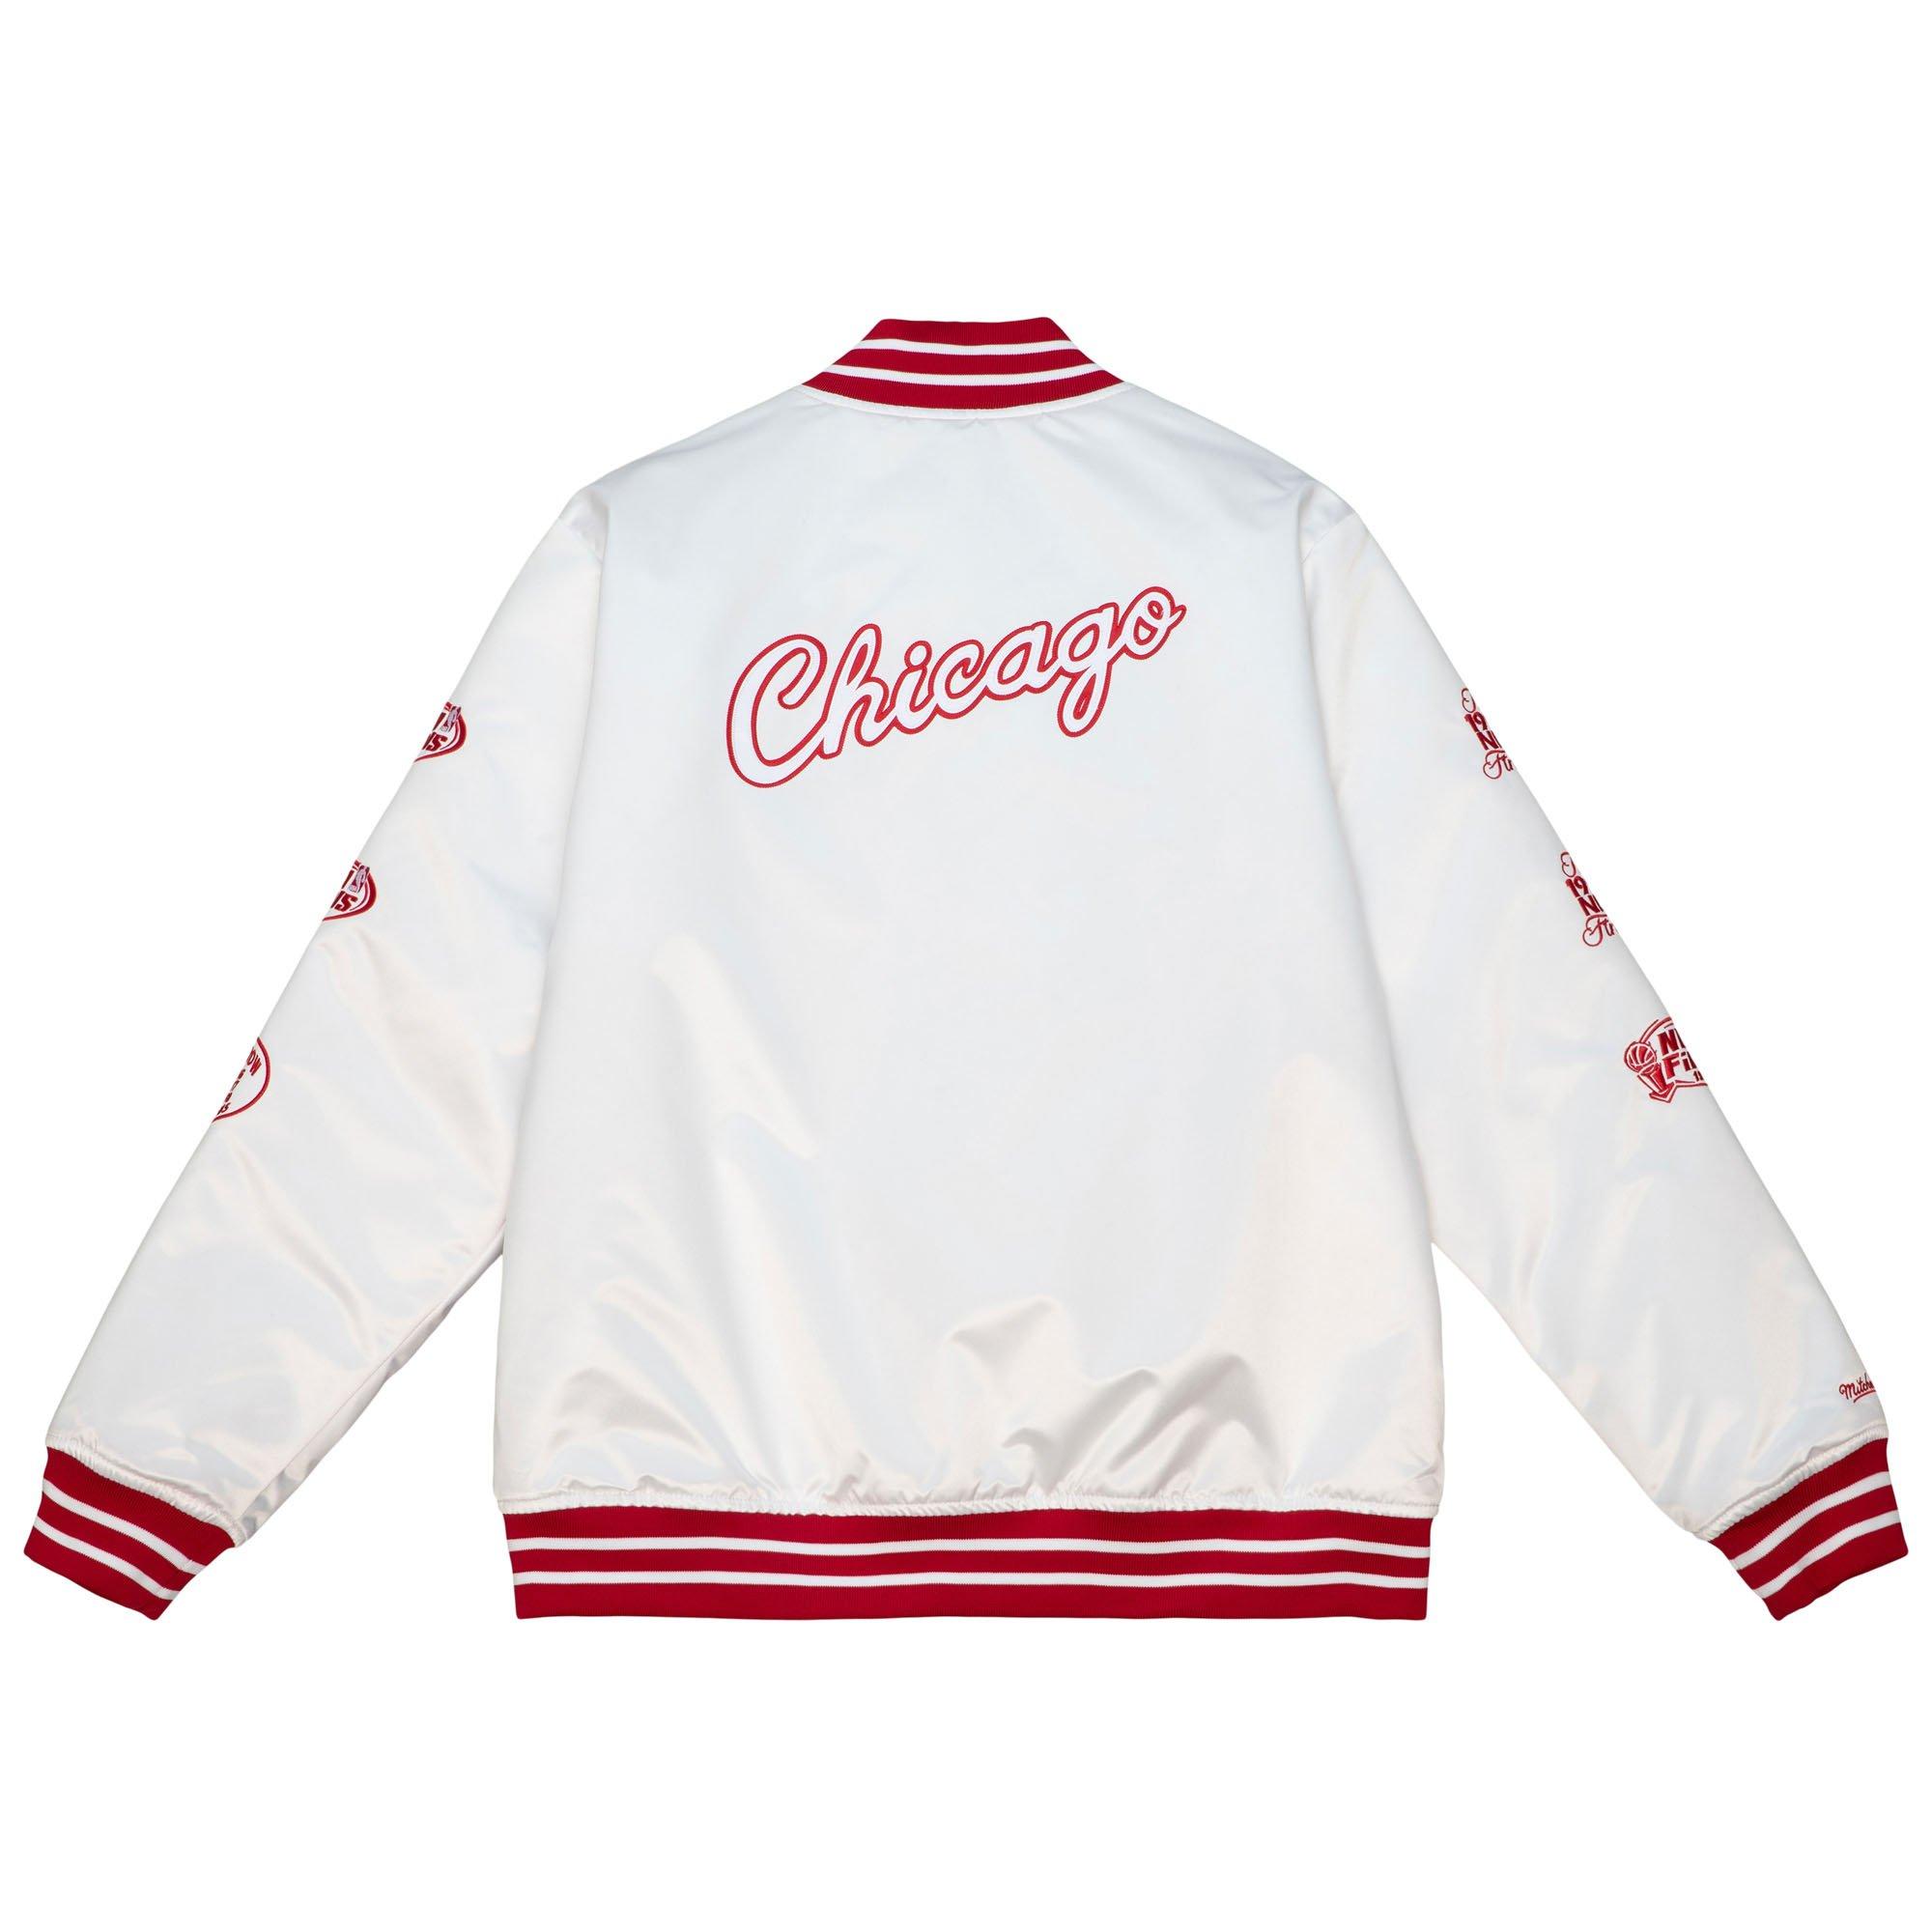 Mitchell and Ness Chicago Bulls White Cherry Bomb Long Sleeve T Shirt, White, 100% Cotton, Size XL, Rally House